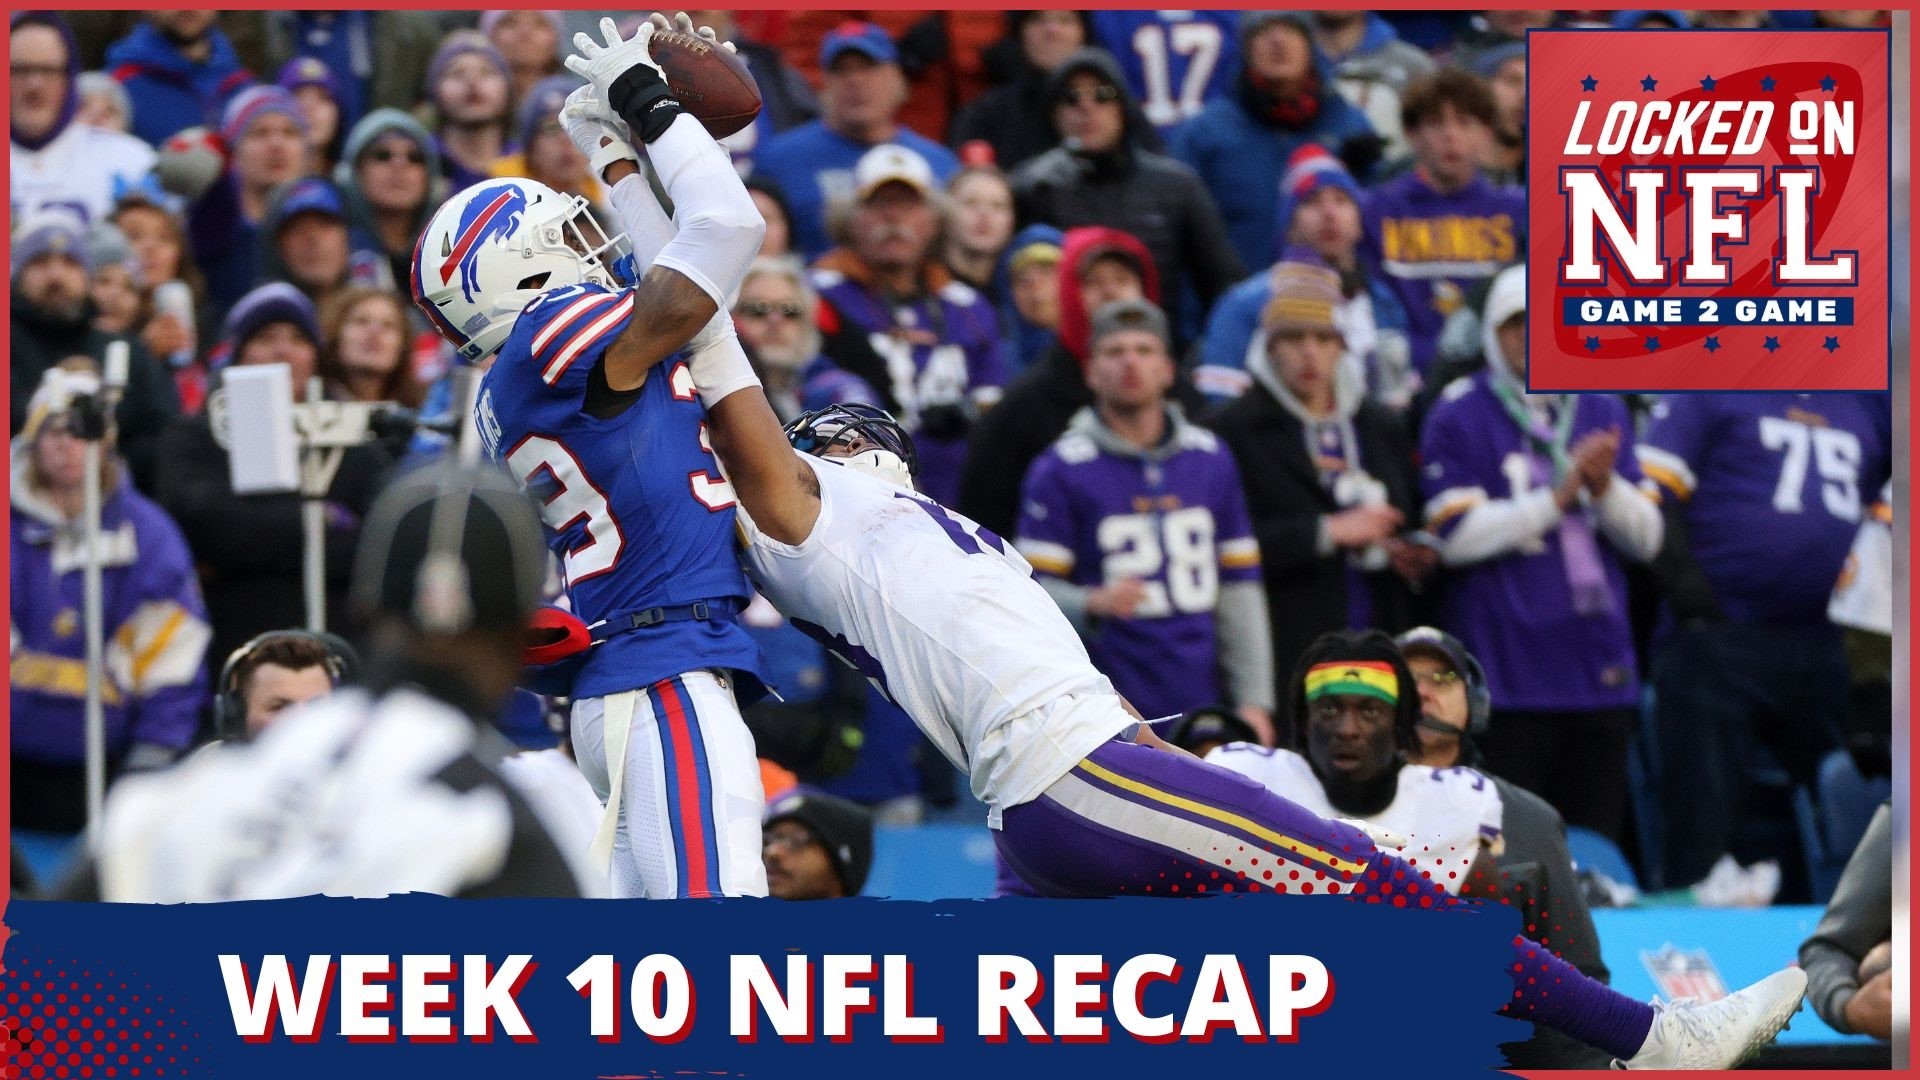 A breakdown of Sunday's NFL games from the Vikings and Bills playing a classic football game to the Bucs beating the Seahawks in Munich.